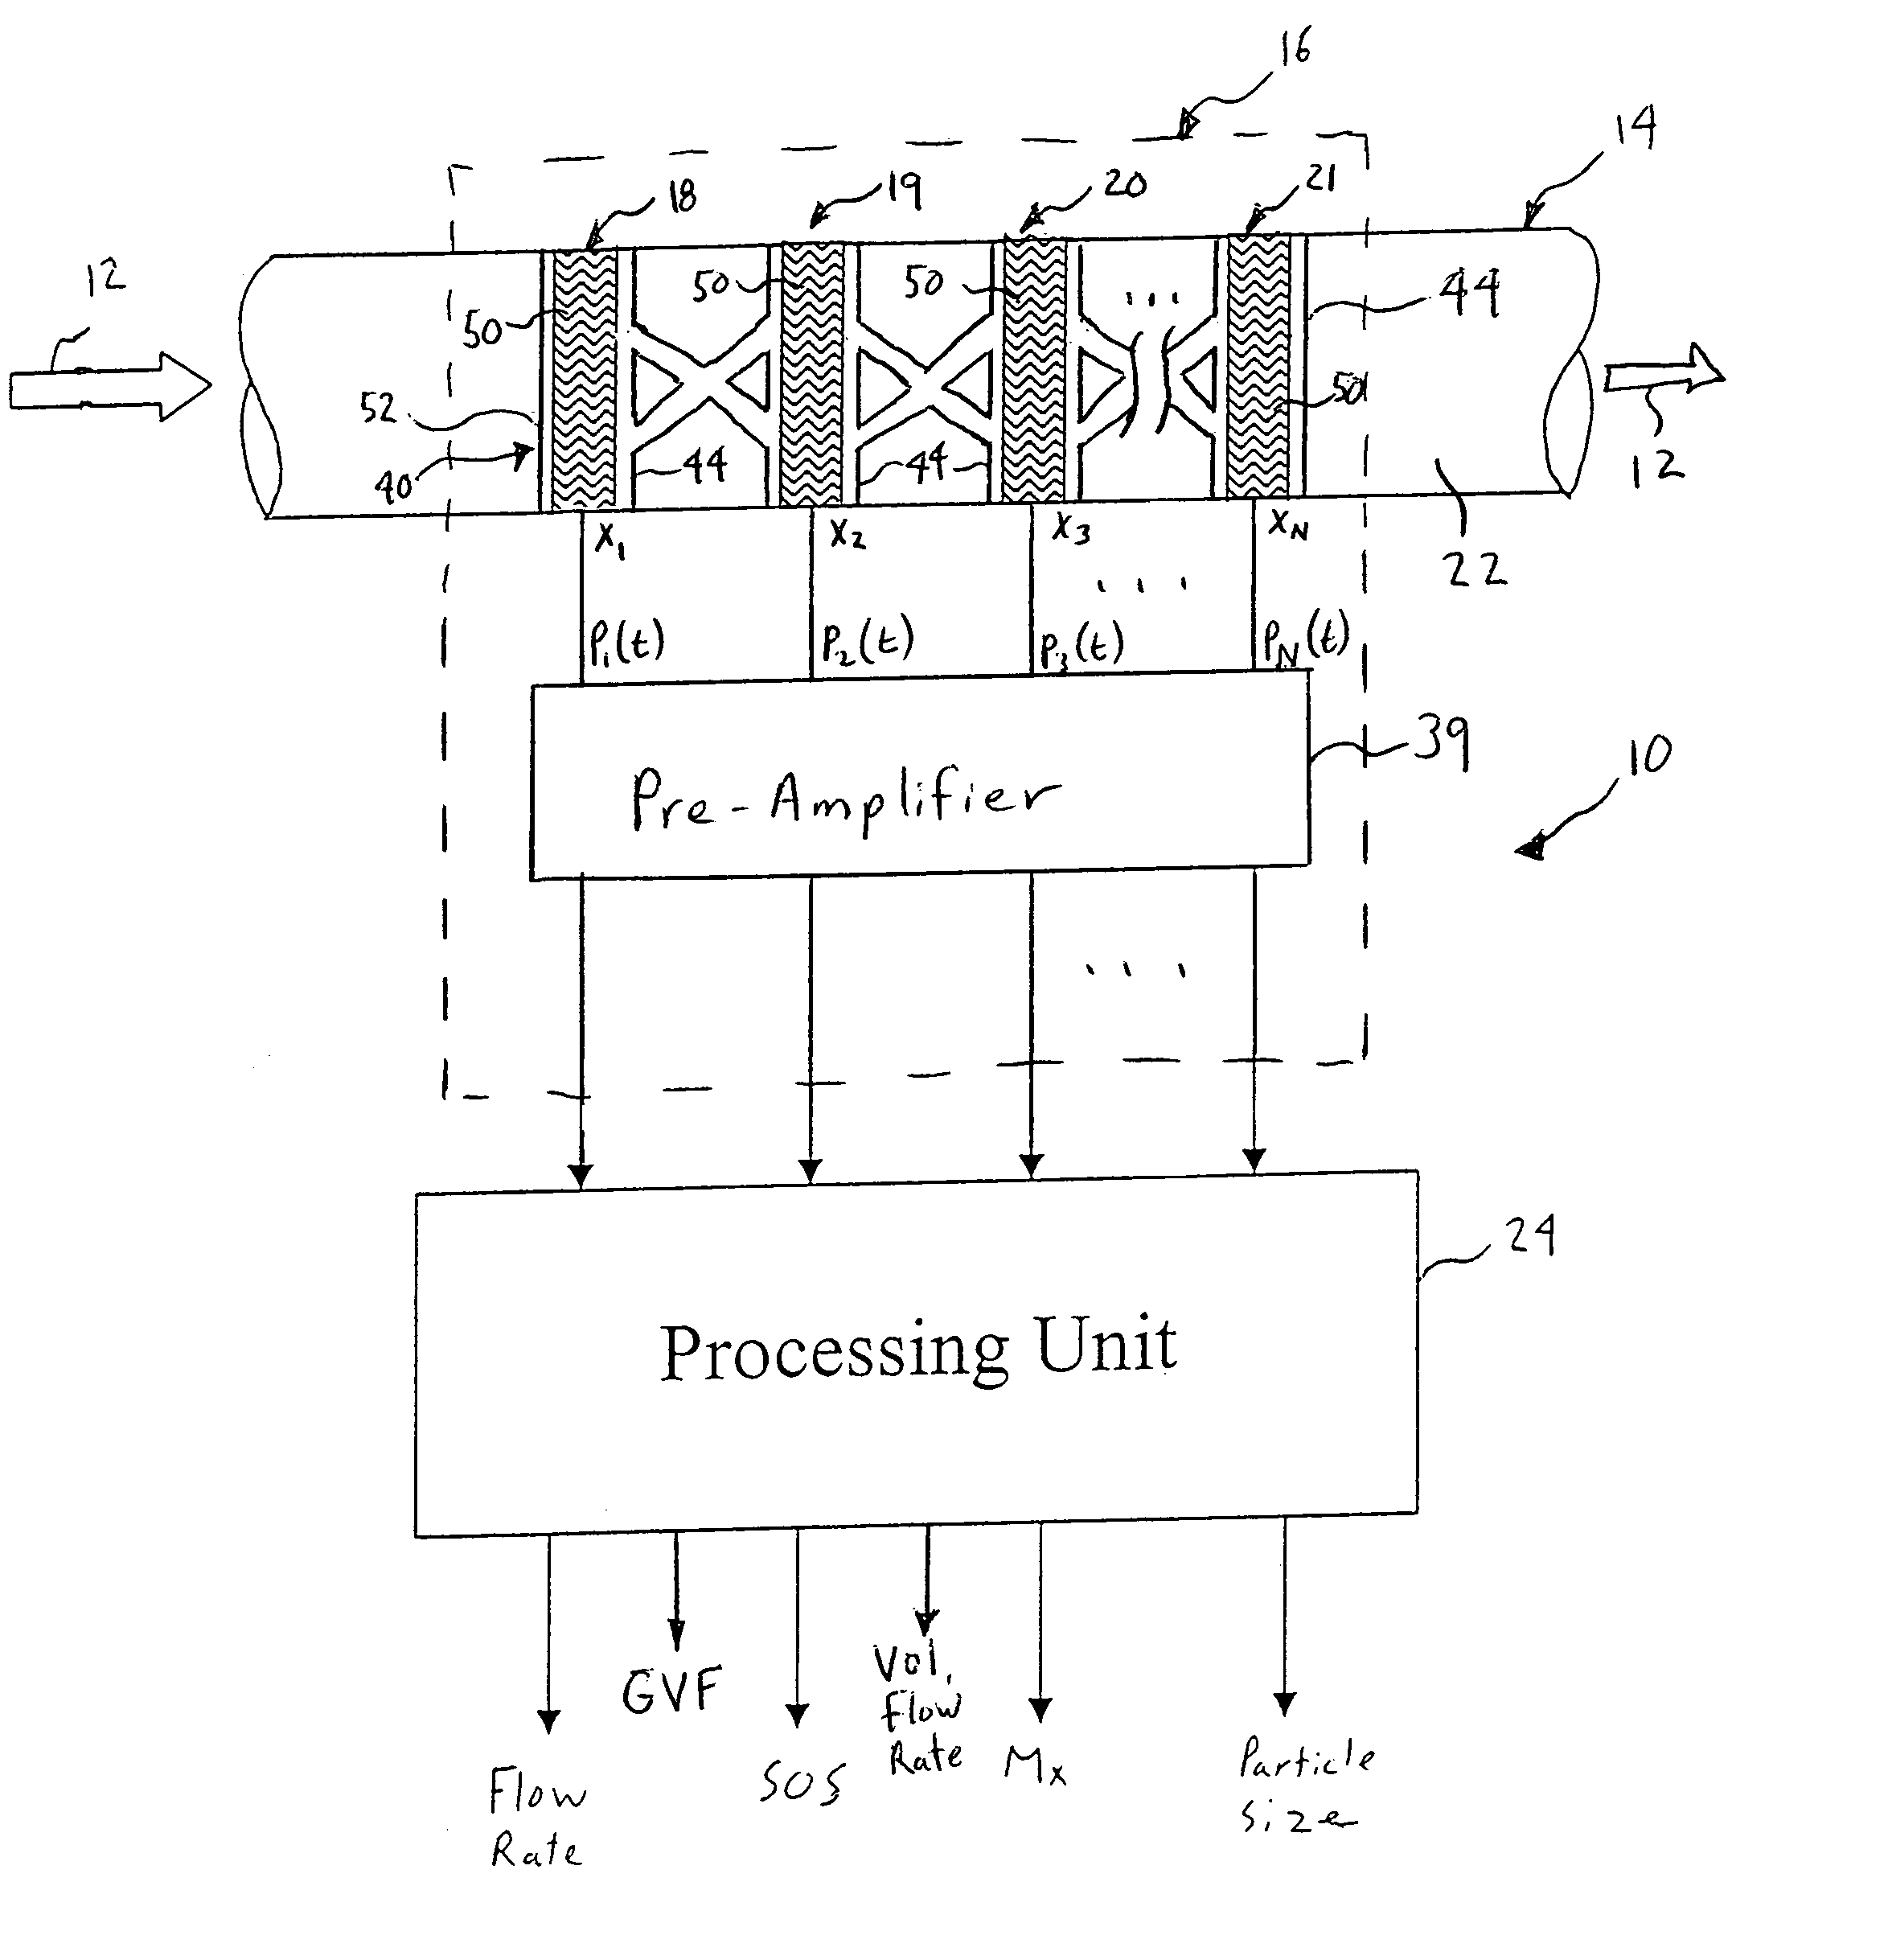 Apparatus having a multi-band sensor assembly for measuring a parameter of a fluid flow flowing within a pipe